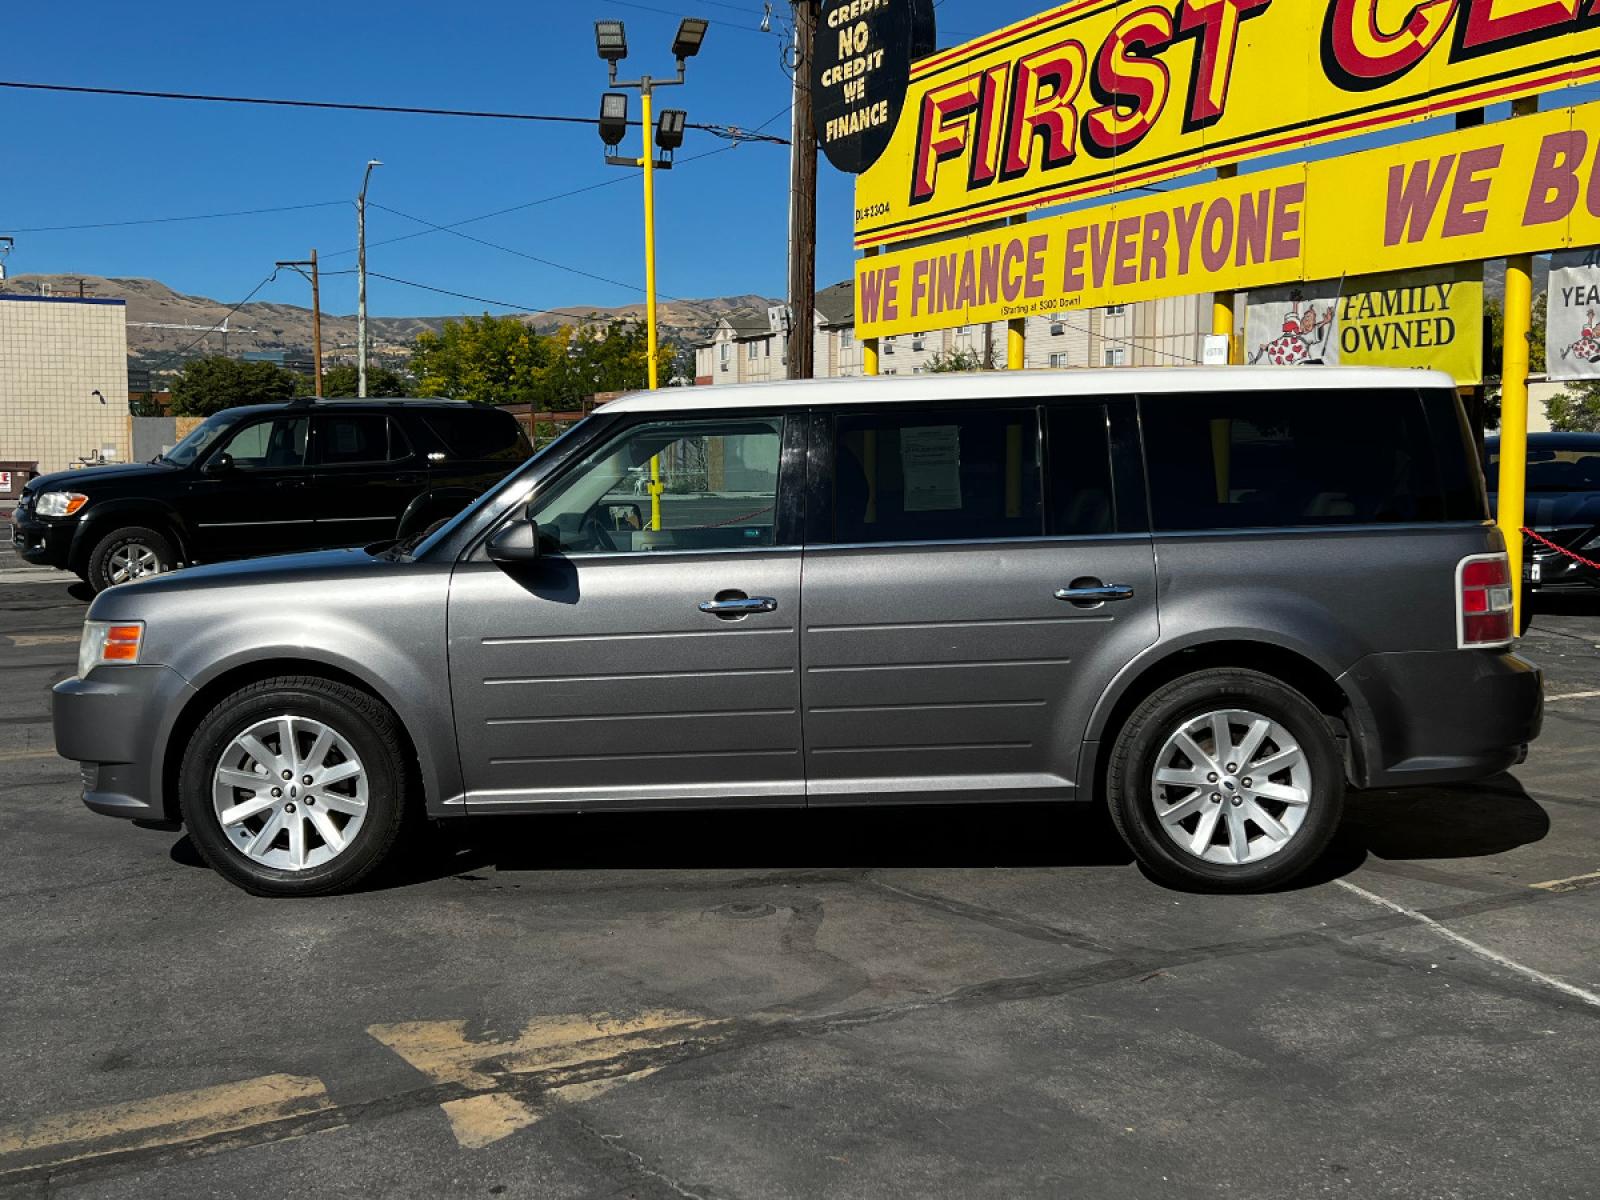 2009 Sterling Gray Metallic Ford Flex SEL (2FMDK52C49B) with an 3.5L V6 engine, Automatic transmission, located at 801 South State Street, Salt Lake City, UT, 84111, (801) 328-0098, 40.751953, -111.888206 - Life is crazy. Now is the time to buy! All of our prices are just dollars above our cost. These prices will change as soon as life isn't so crazy. So please call or come in. We are here to save you a lot of money! Our service department is OPEN DAILY to help with any of your service needs. P - Photo #1